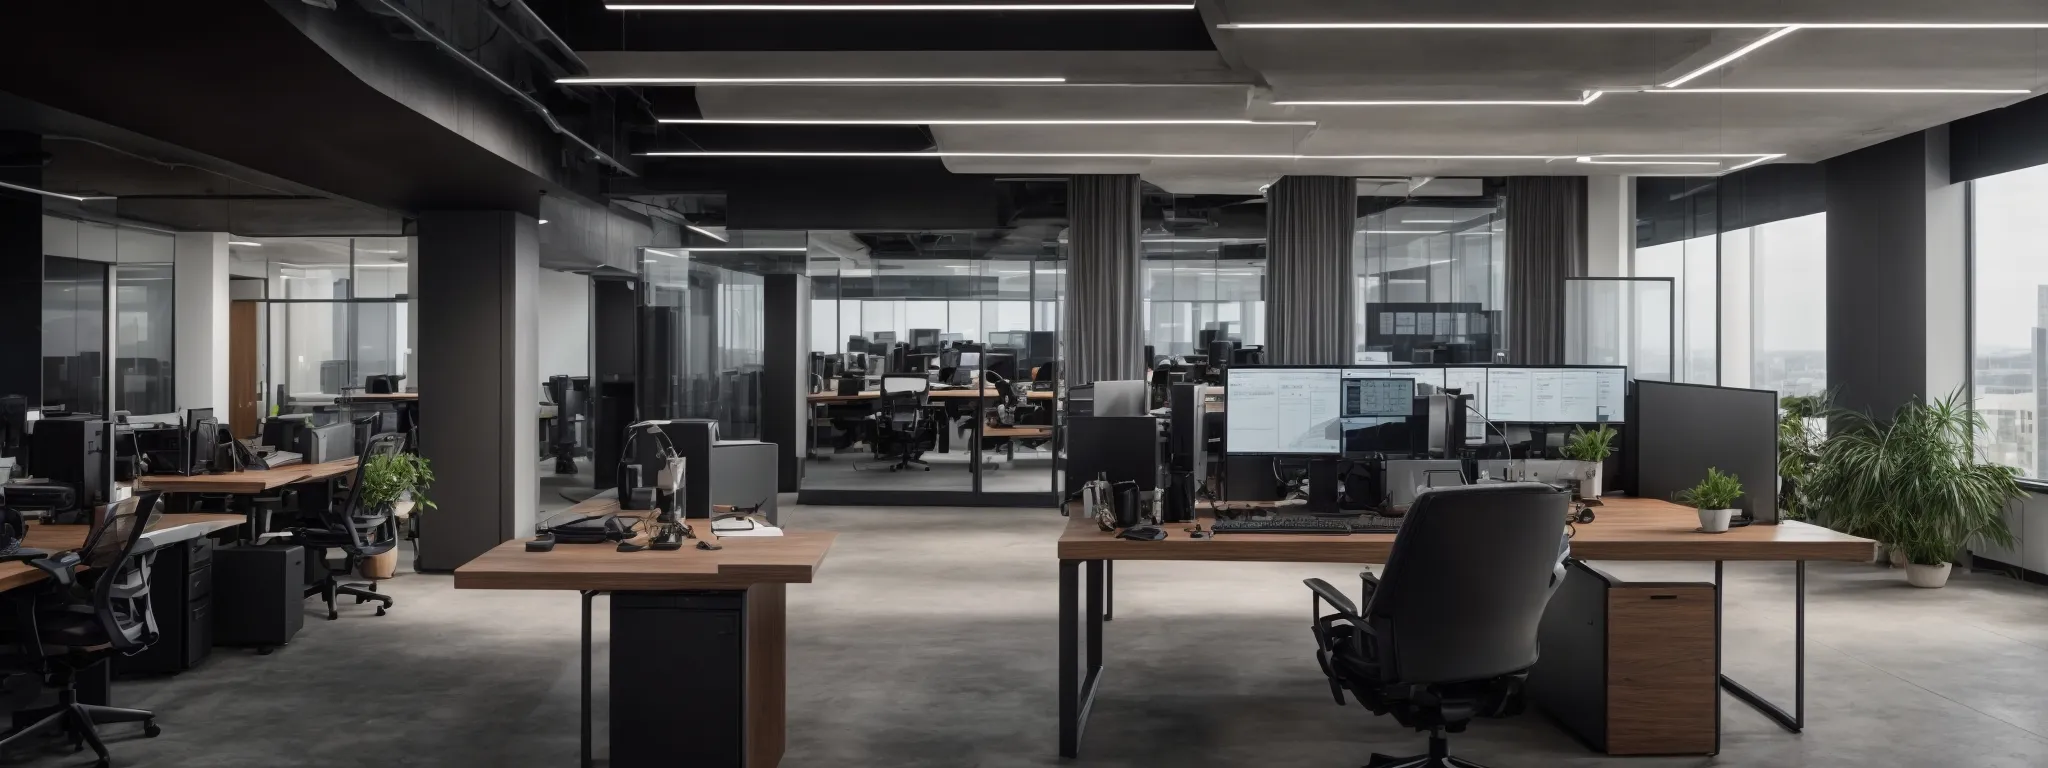 a sleek, modern office with a row of cutting-edge computers reflects a creative workspace dedicated to digital innovation and search engine mastery.